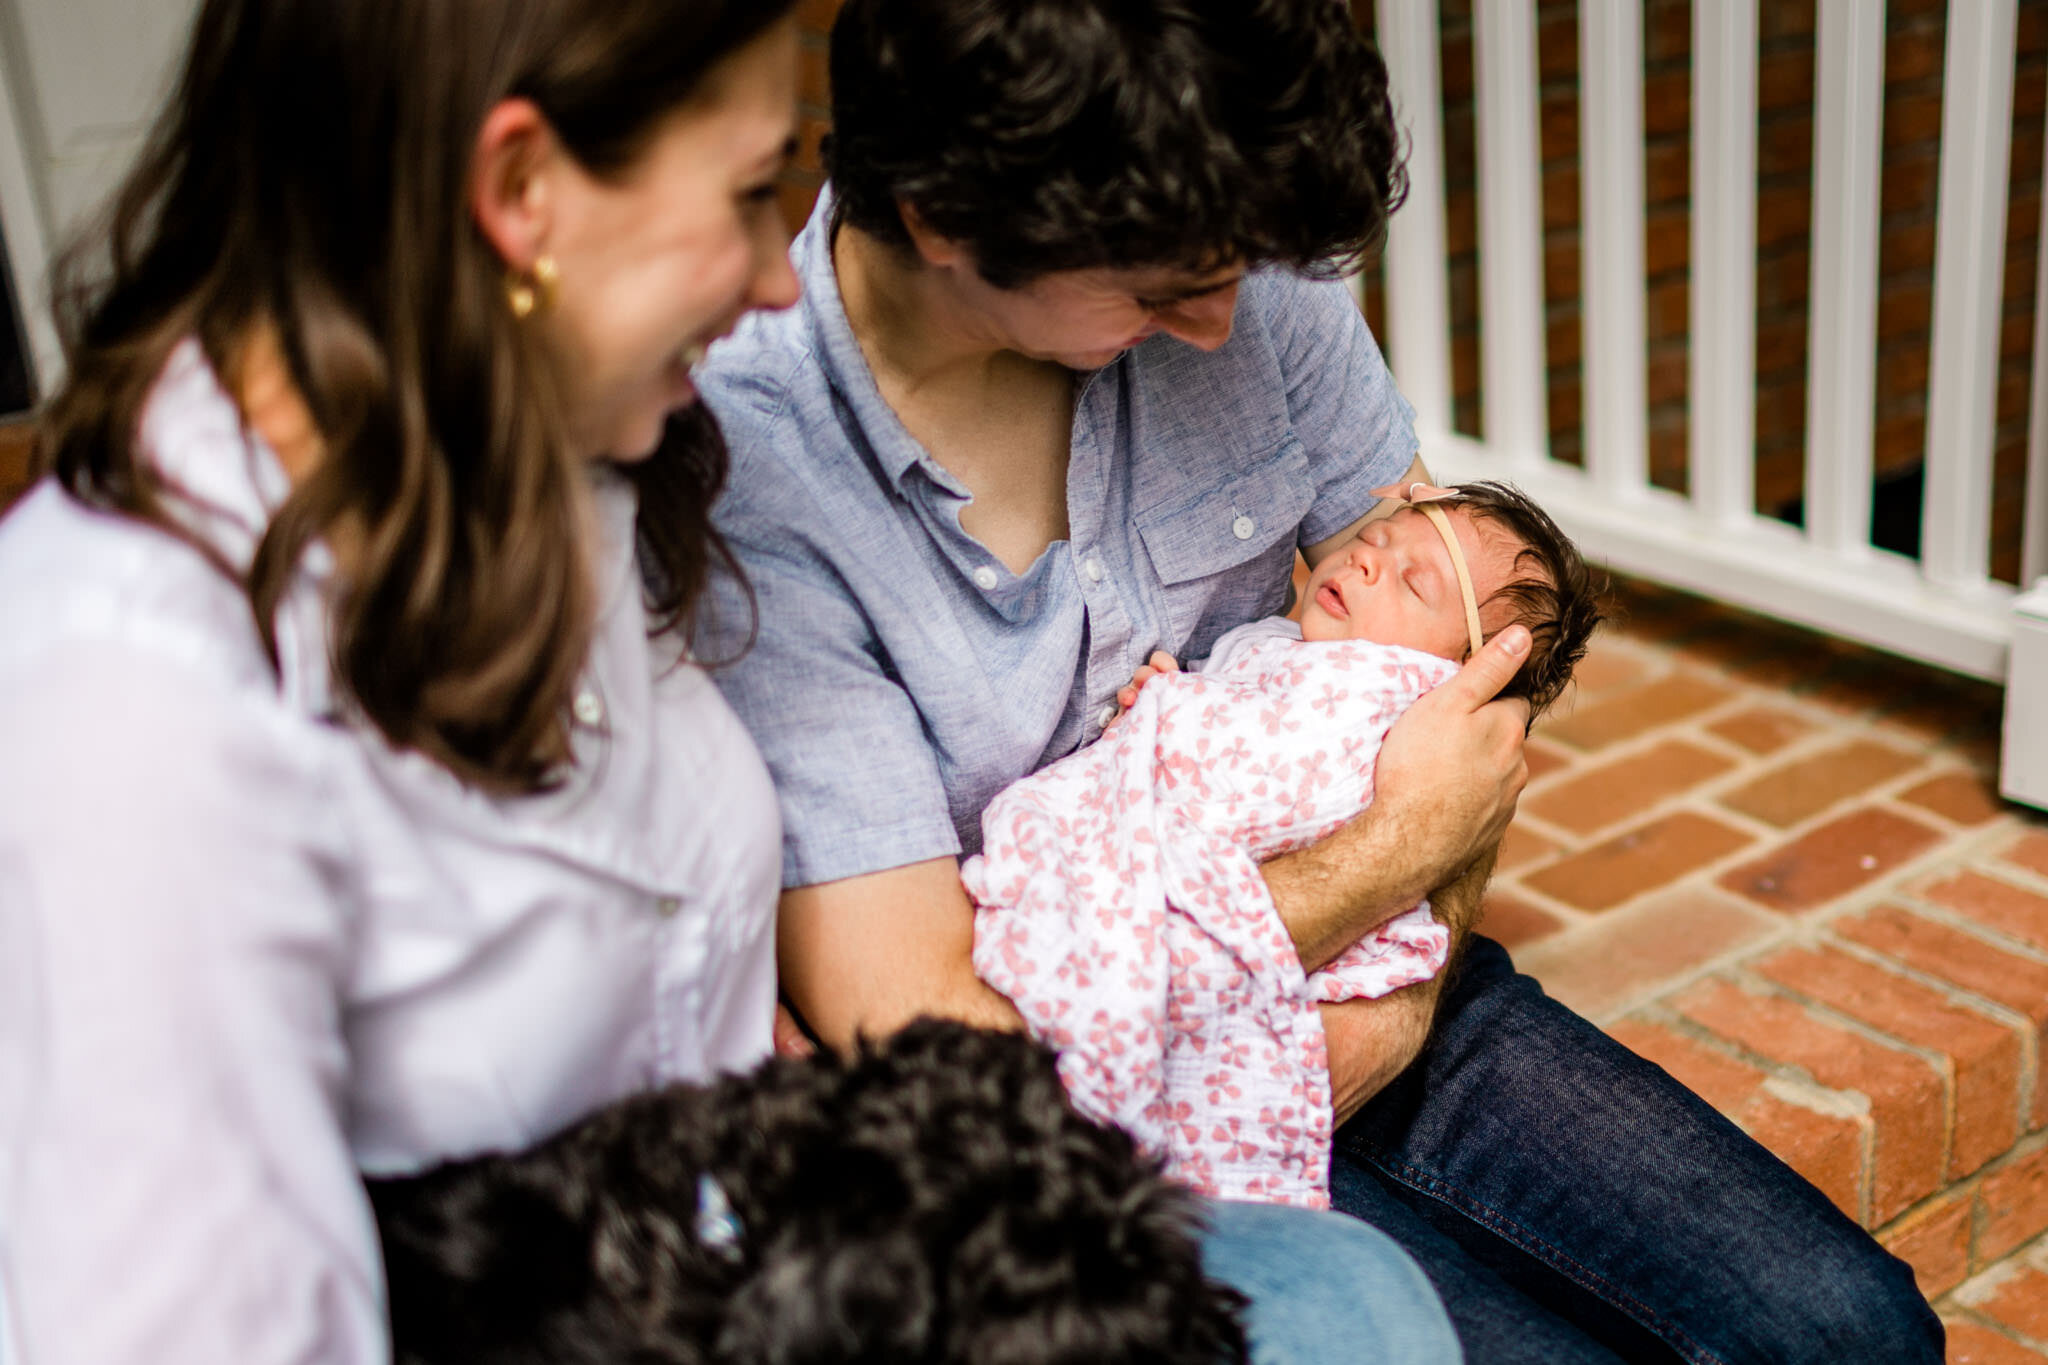 Durham Newborn Photographer | By G. Lin Photography | Porch portrait of family sitting outside on brick steps